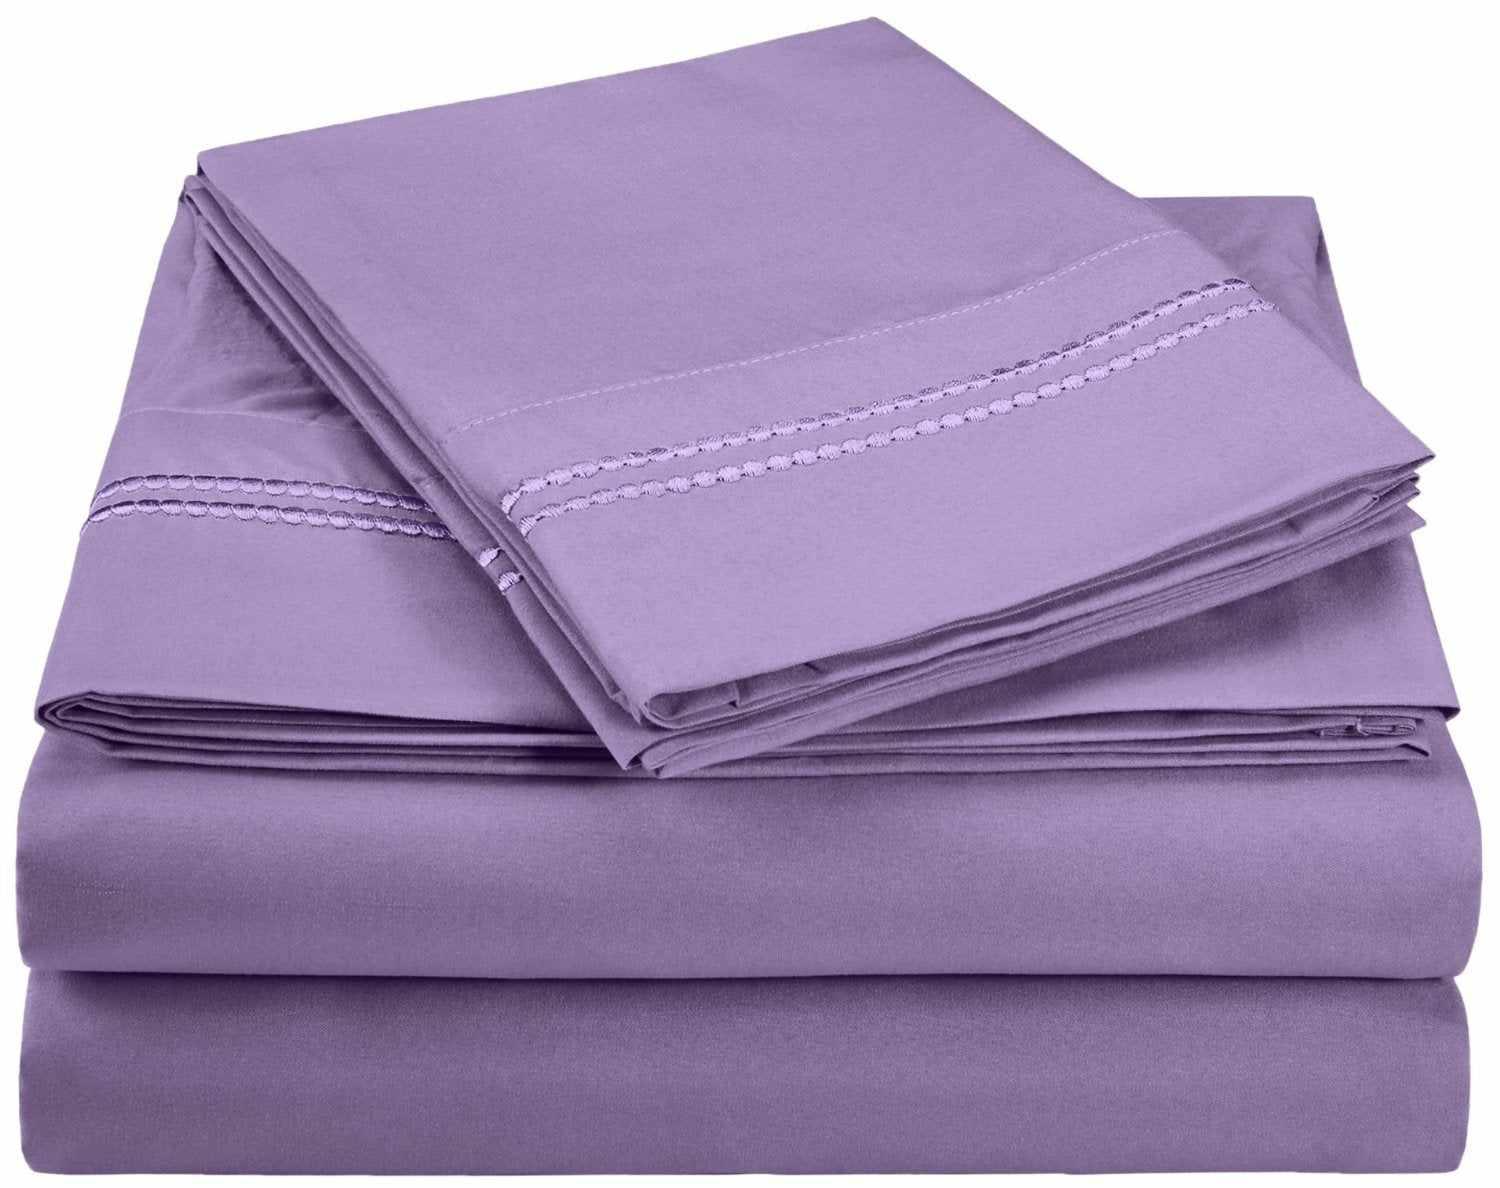 Superior 3000 Series Wrinkle Resistant 2 Line Embroidery Sheet Set - Lilac